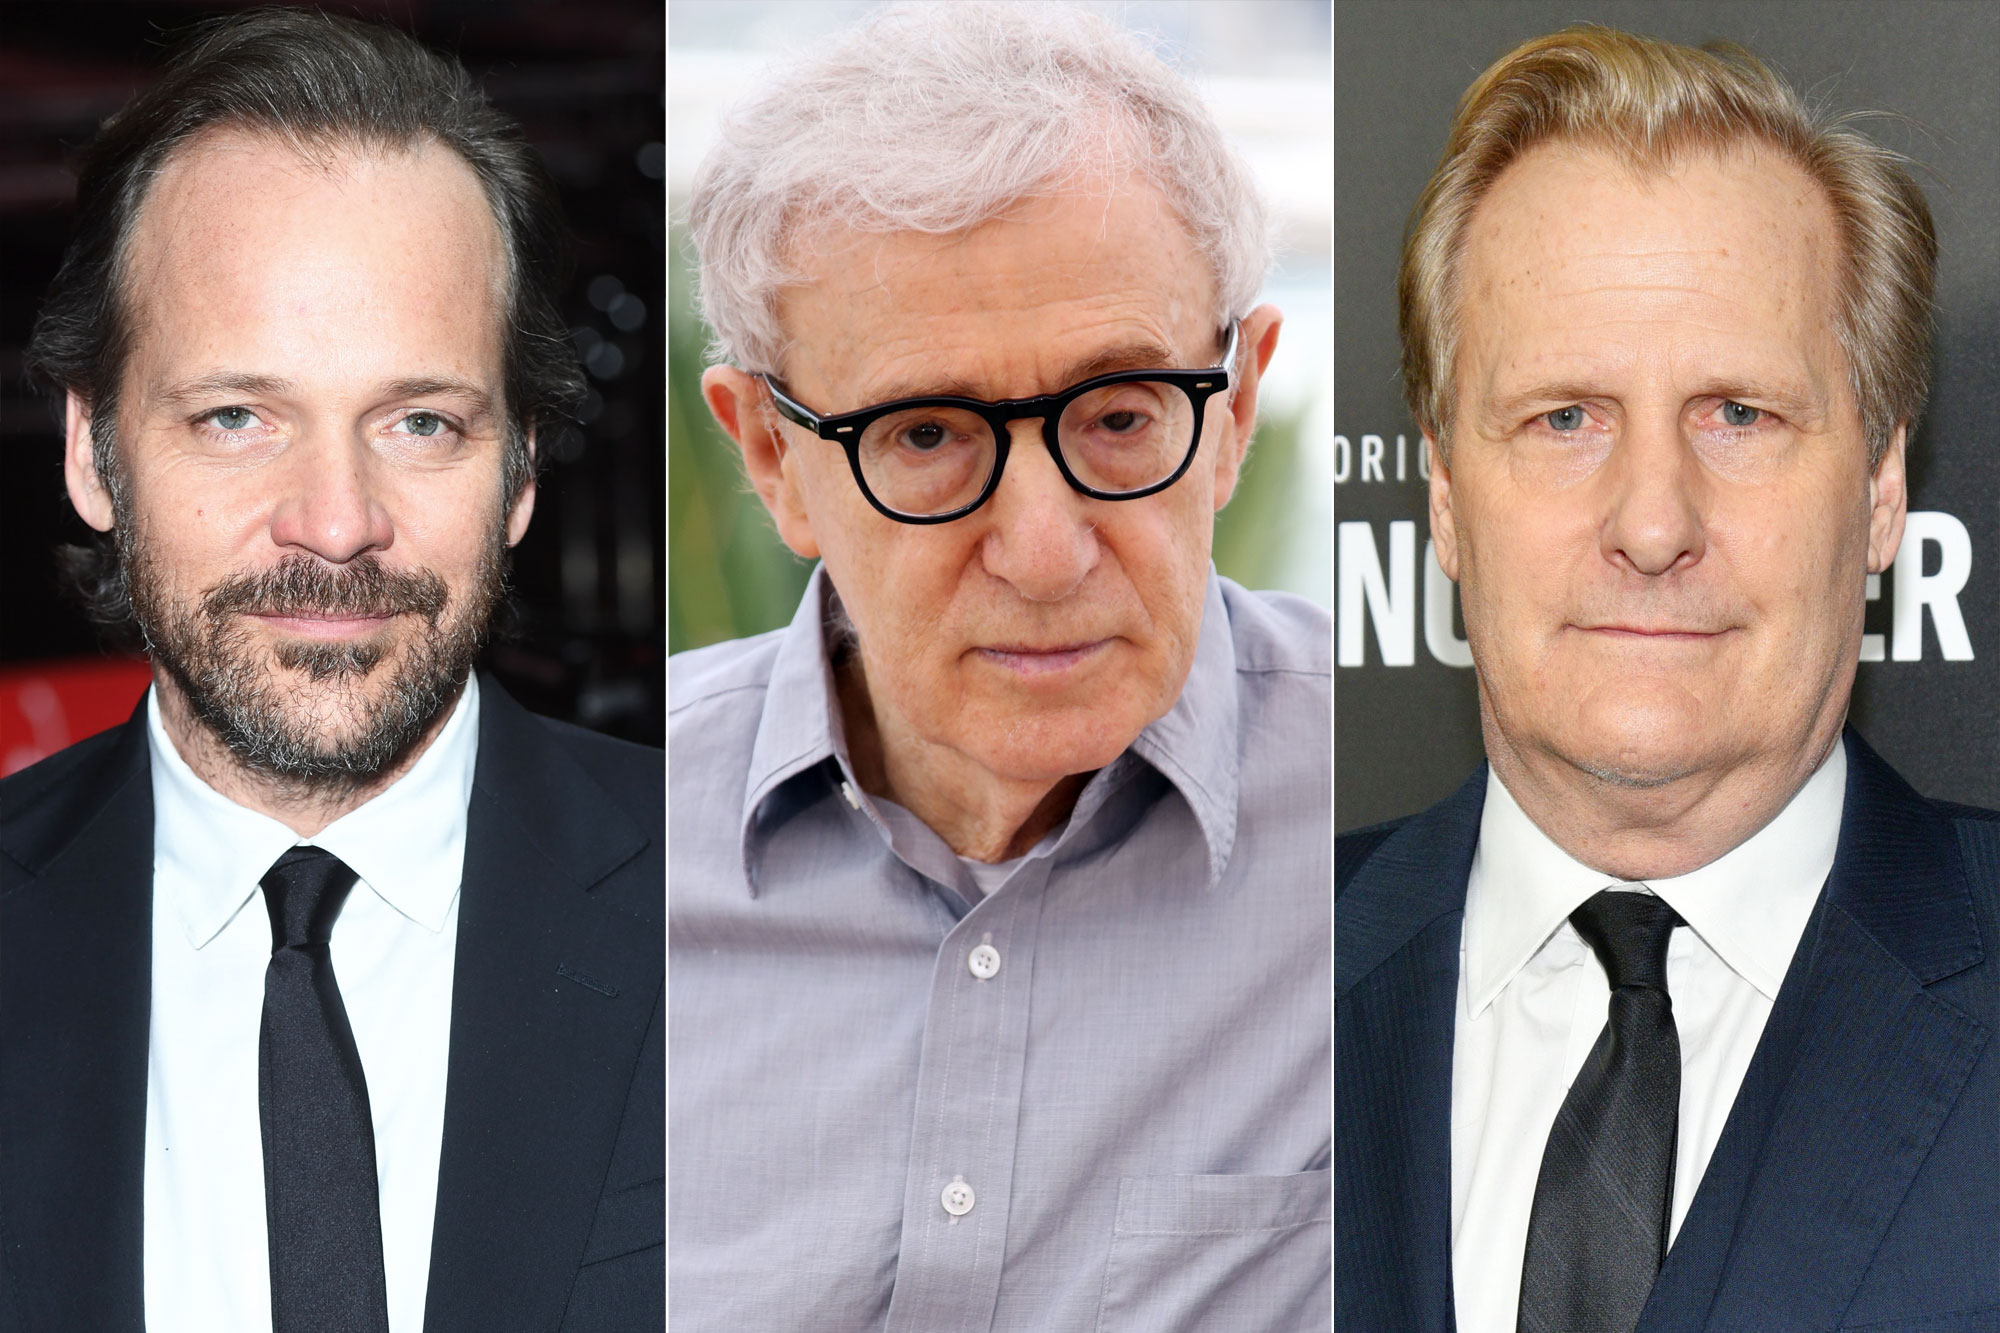 Peter Sarsgaard Say He Will Not Work With Woody Allen Again